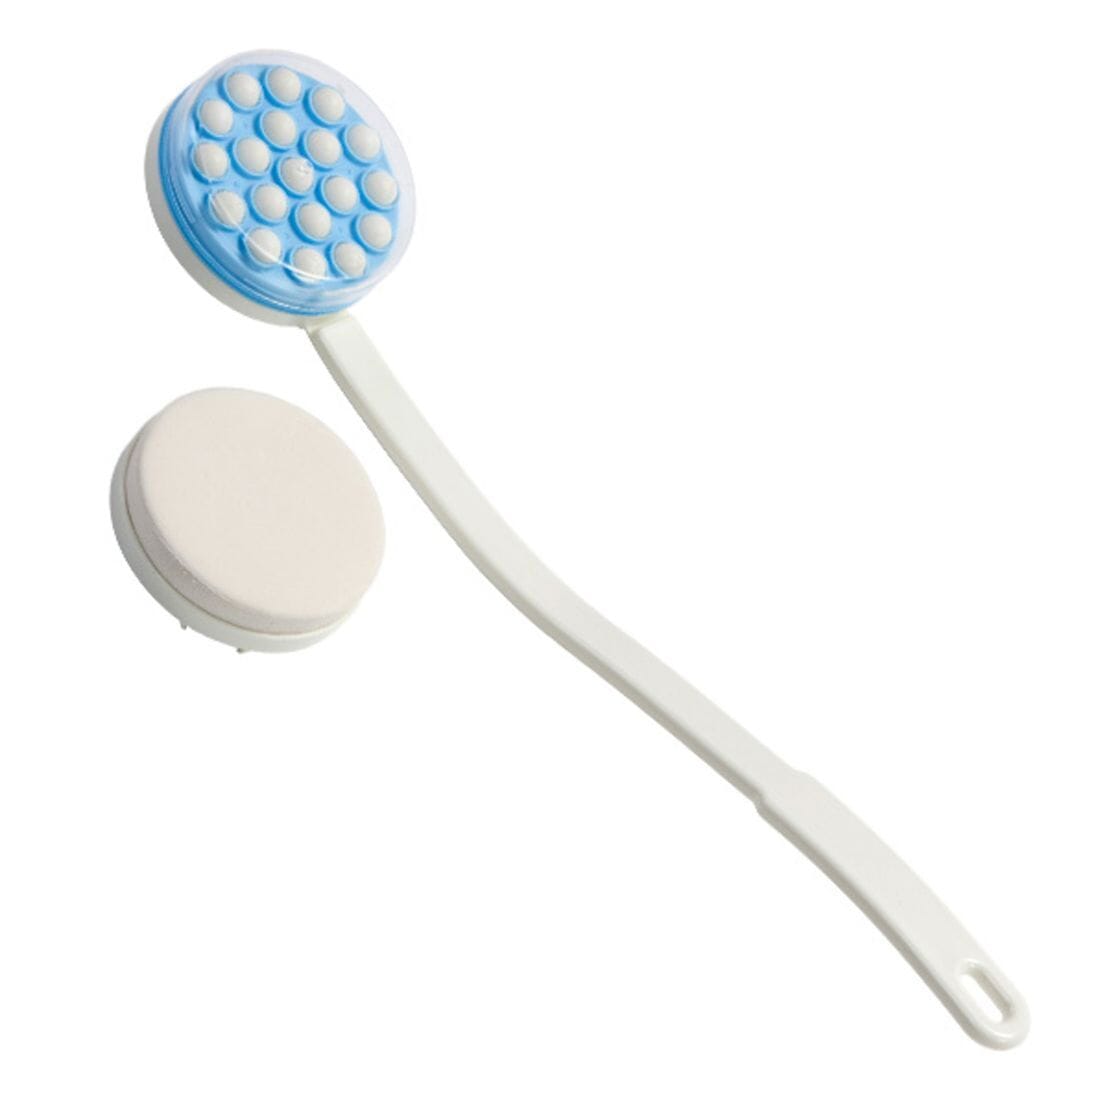 View Dual Function Lotion and Cream Applicator information